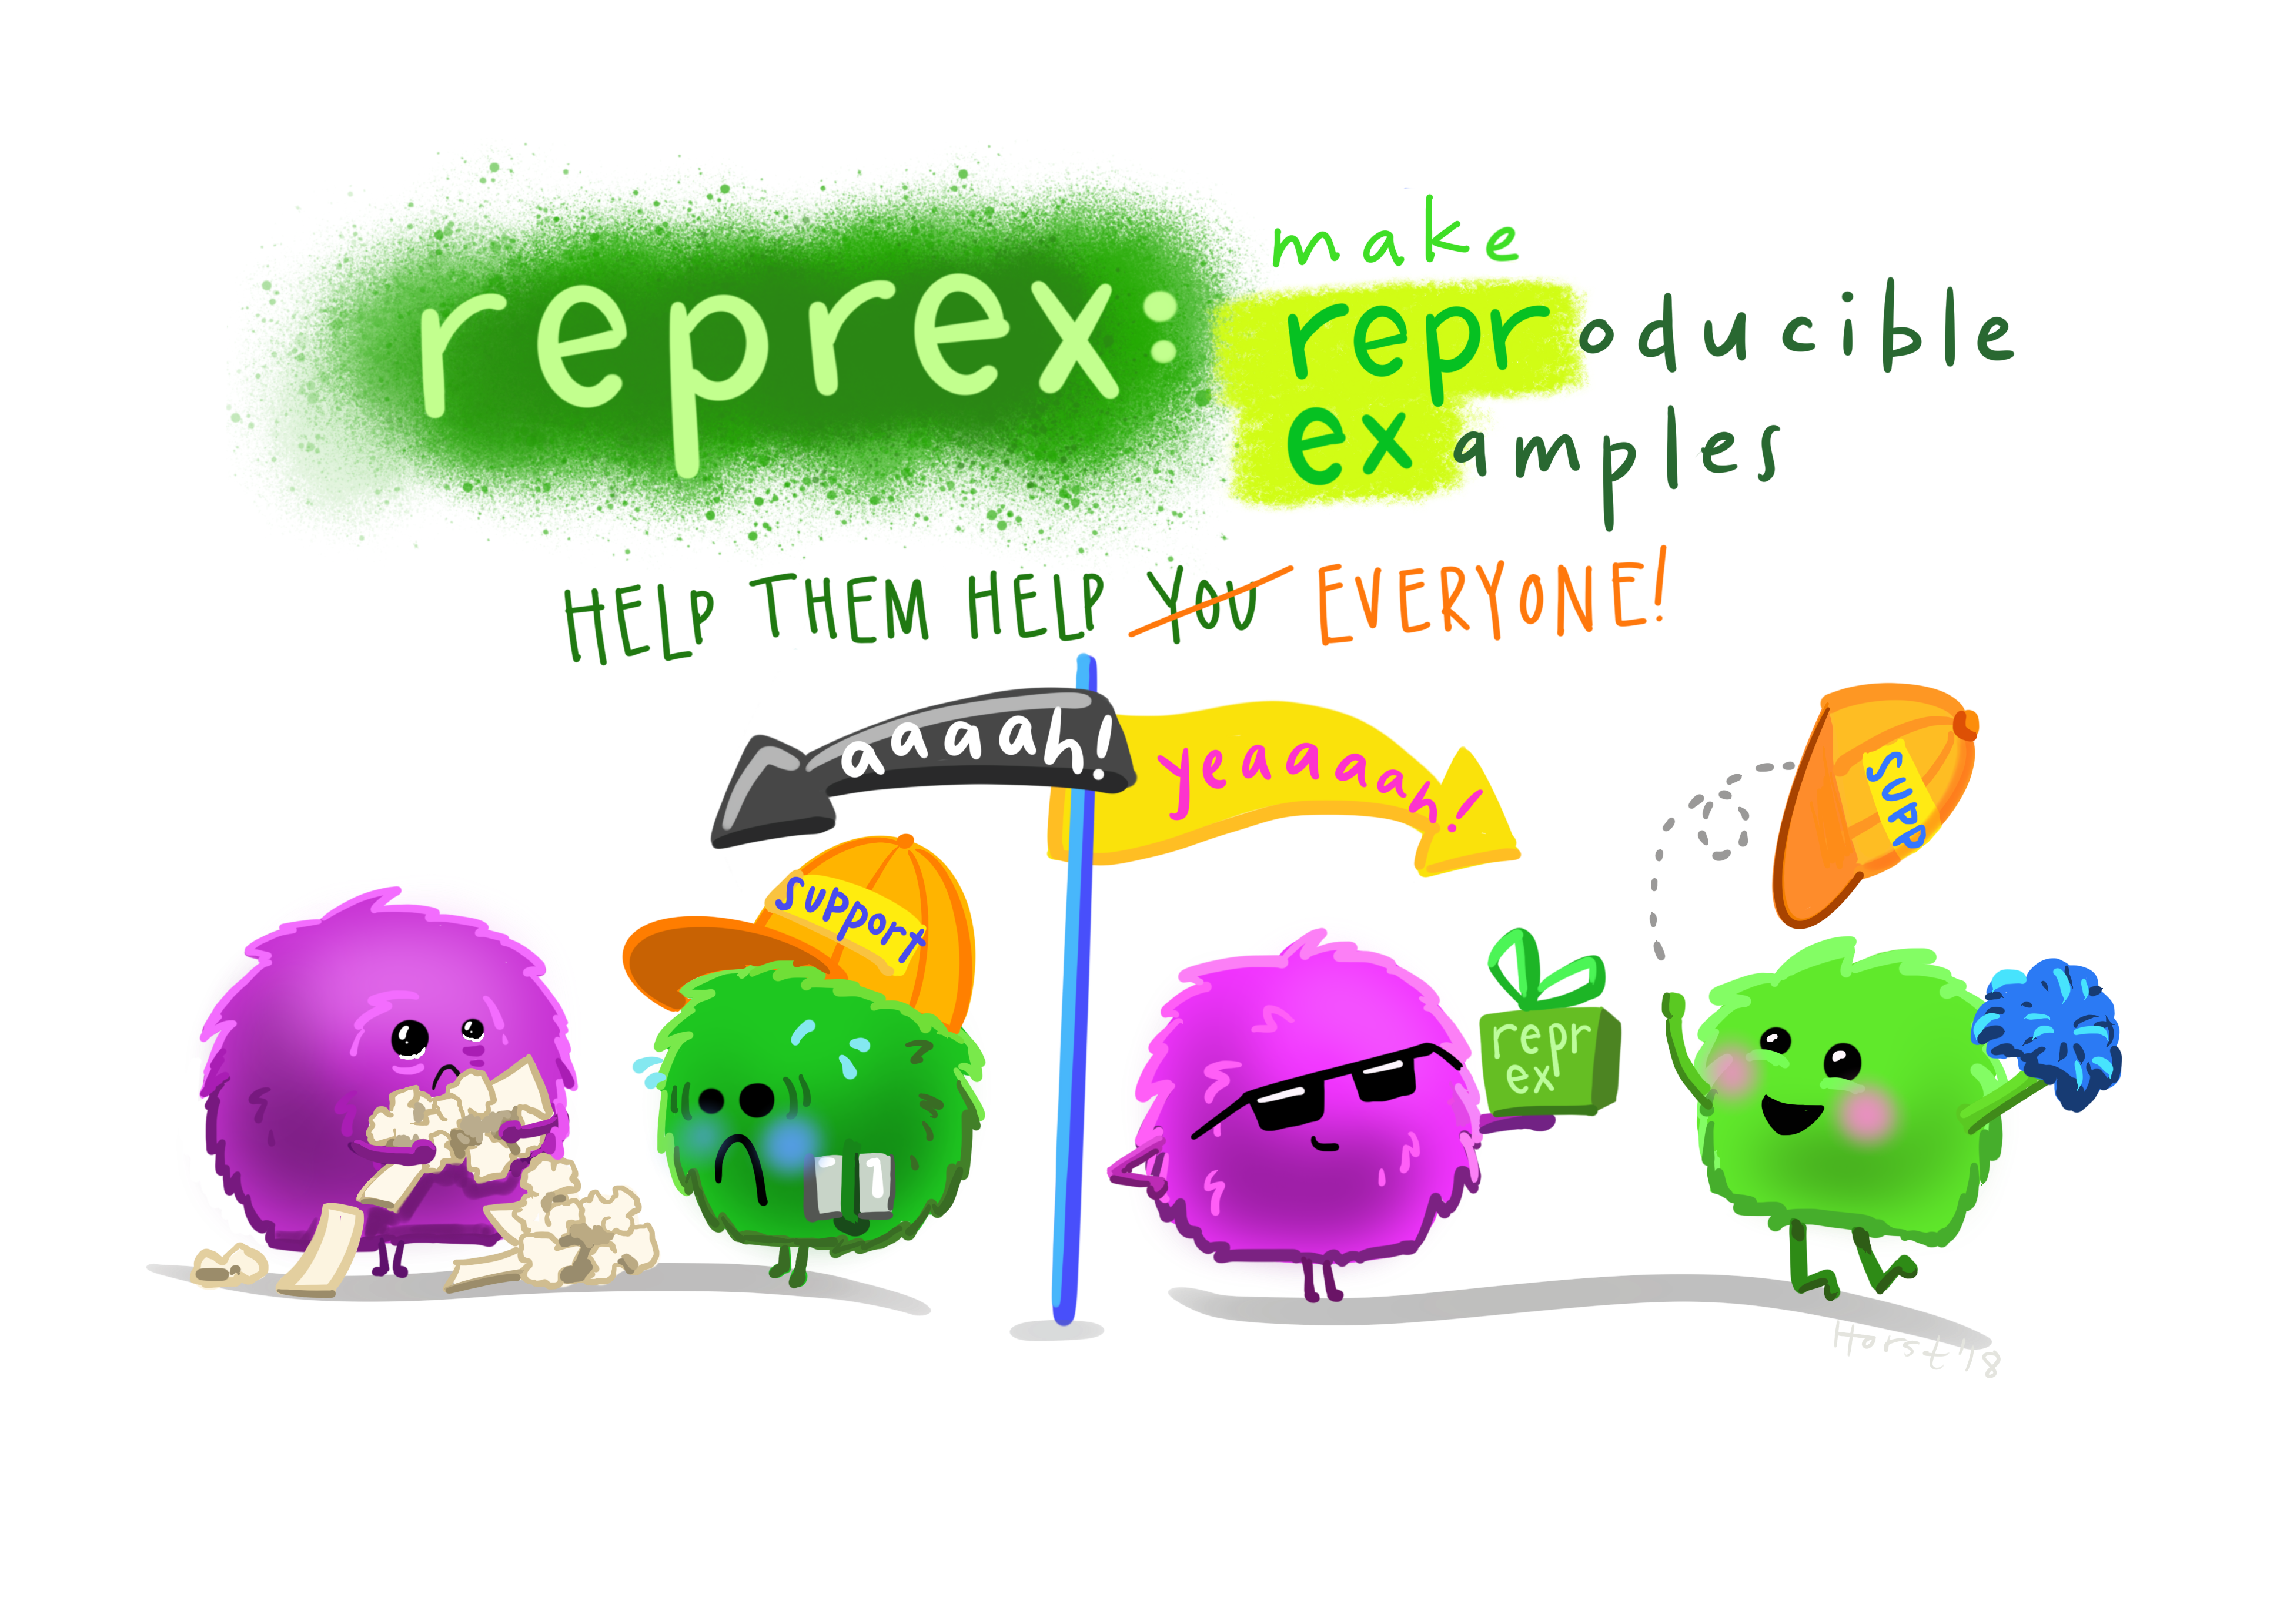 A side-by-side comparison of a monster providing problematic code to tech support when it is on a bunch of crumpled, disorganized papers, with both monsters looking sad and very stressed (left), compared to victorious looking monsters celebrating when code is provided in a nice box with a bow labeled “reprex”. Title text reads “reprex: make reproducible examples. Help them help everyone!” Learn more about reprex.